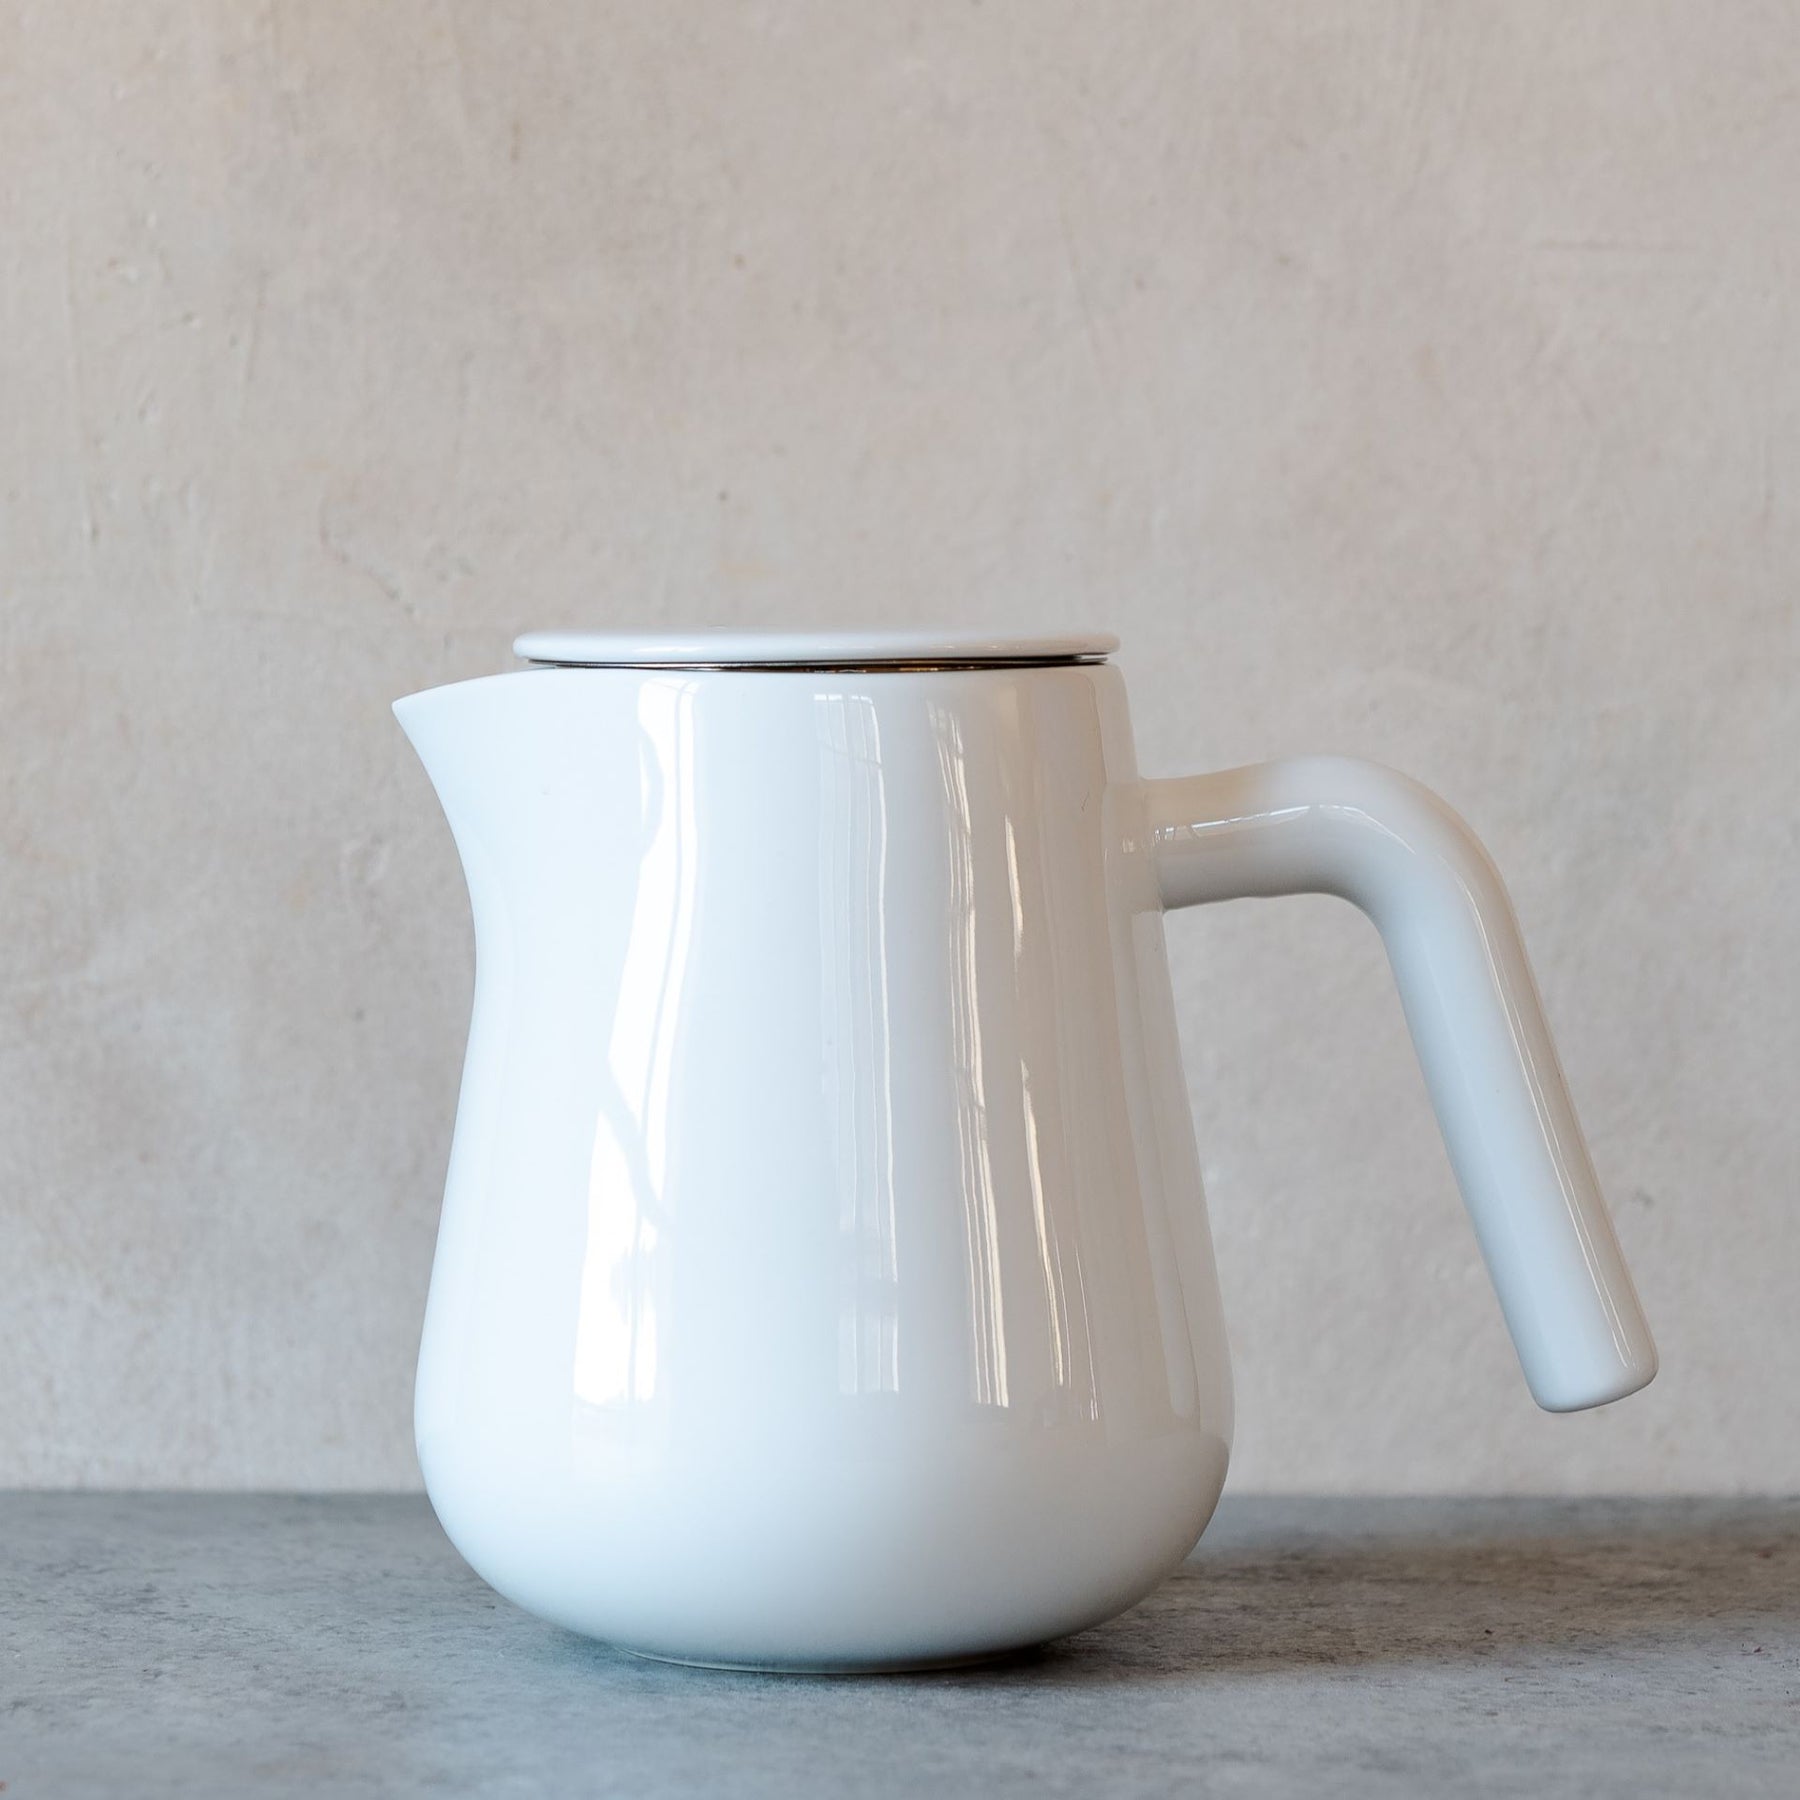 Arca X-tract 2-6 cups - Porcelain, Pure White